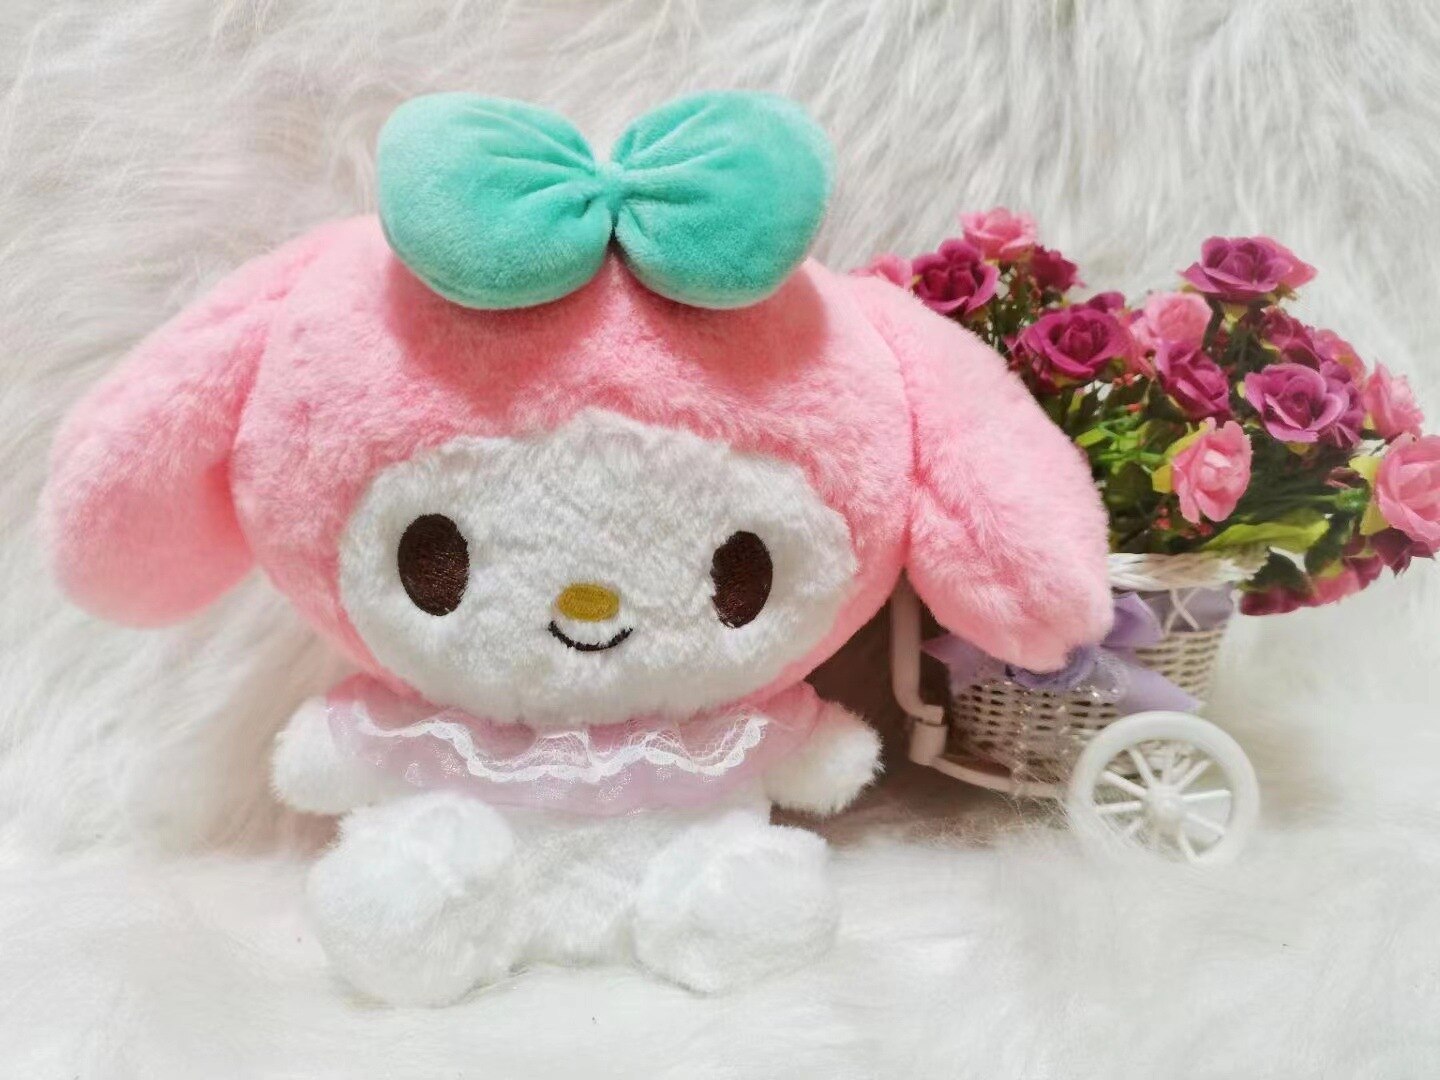 24cm Kawaii Sanrio My Melody Plush Toy Gift Children Doll Home Decoration Comfort Doll Anime Accessories 4 - My Melody Plush